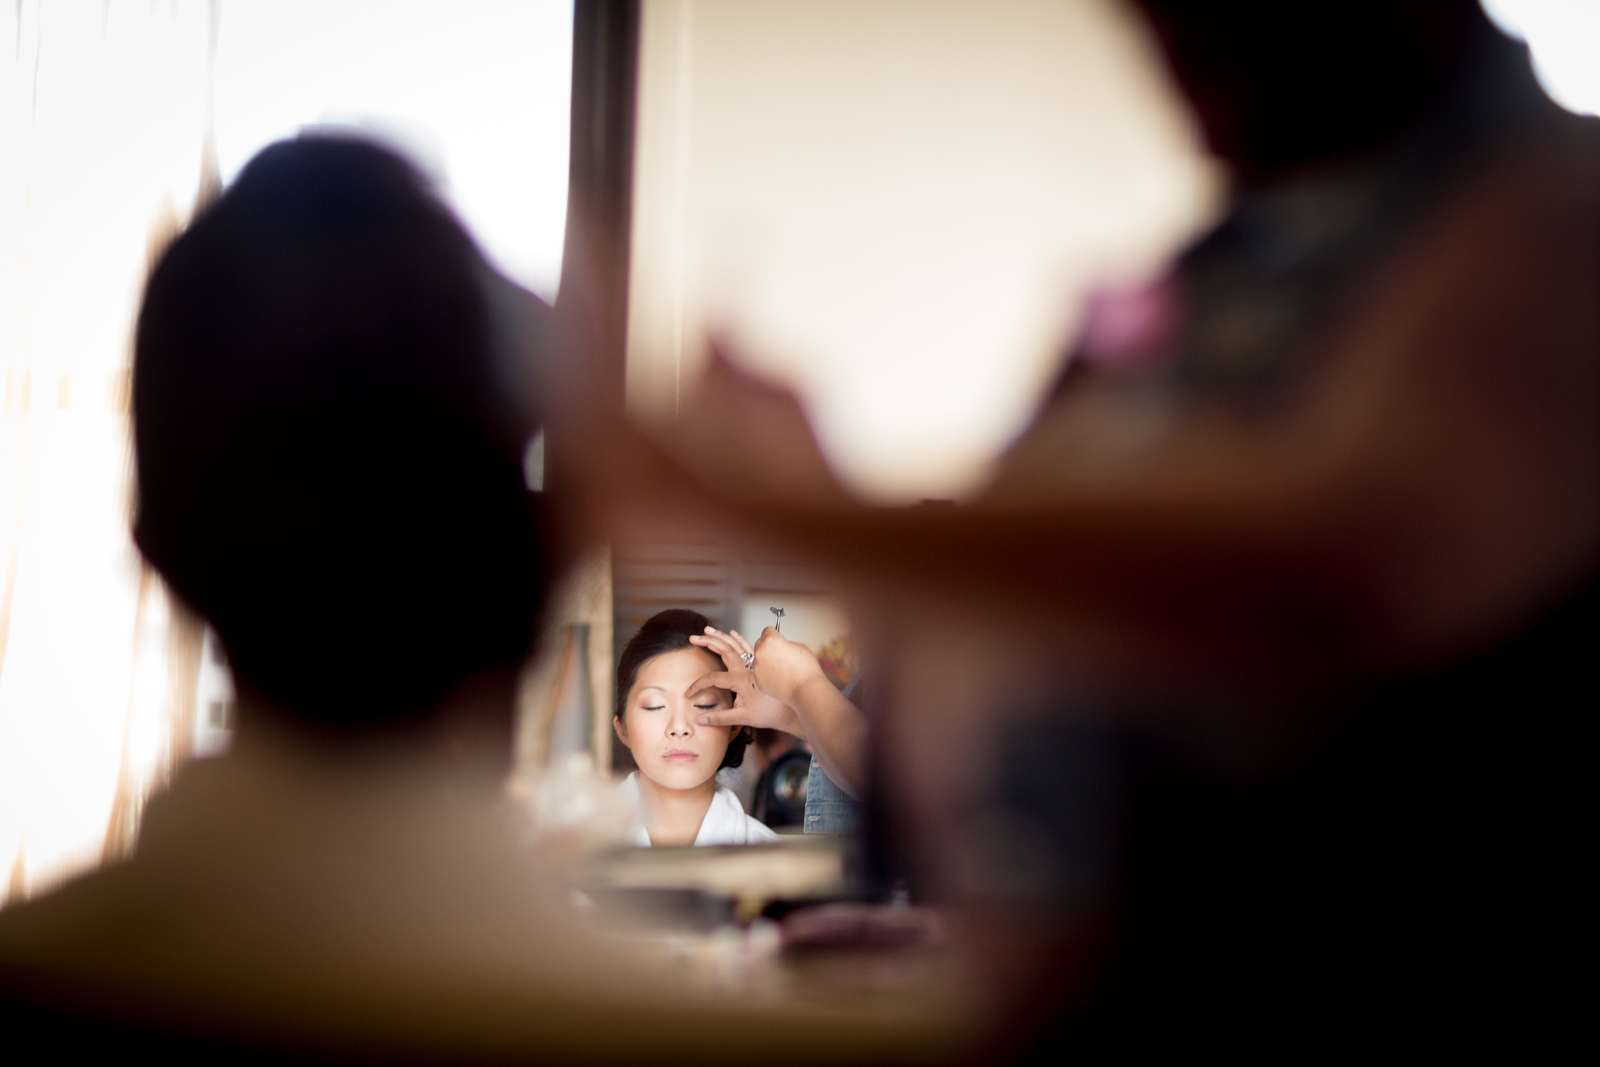 The bride has her makeup applied at the Washington Athletic Club (WAC) prior to the start of her wedding at the Seattle Aquarium. (Wedding Photography by Scott Eklund/Red Box Pictures)